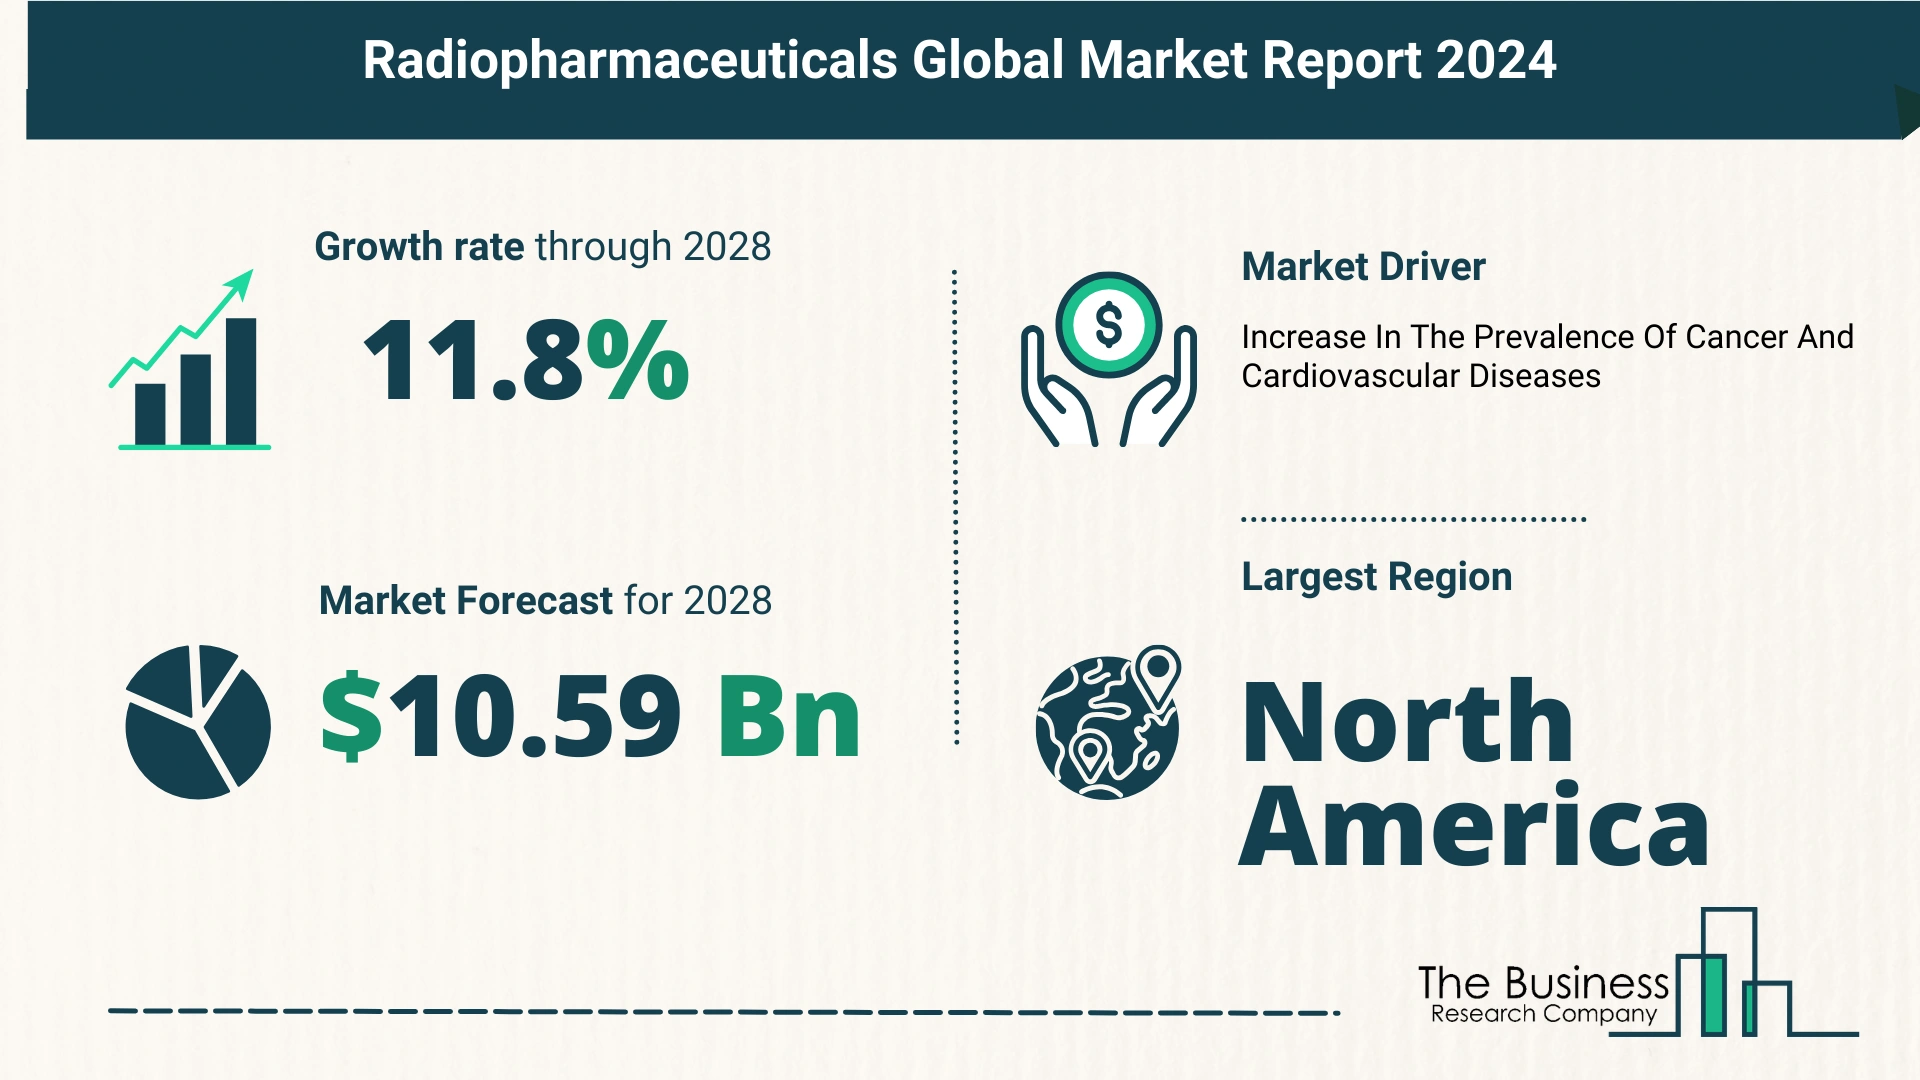 5 Takeaways From The Radiopharmaceuticals Market Overview 2024